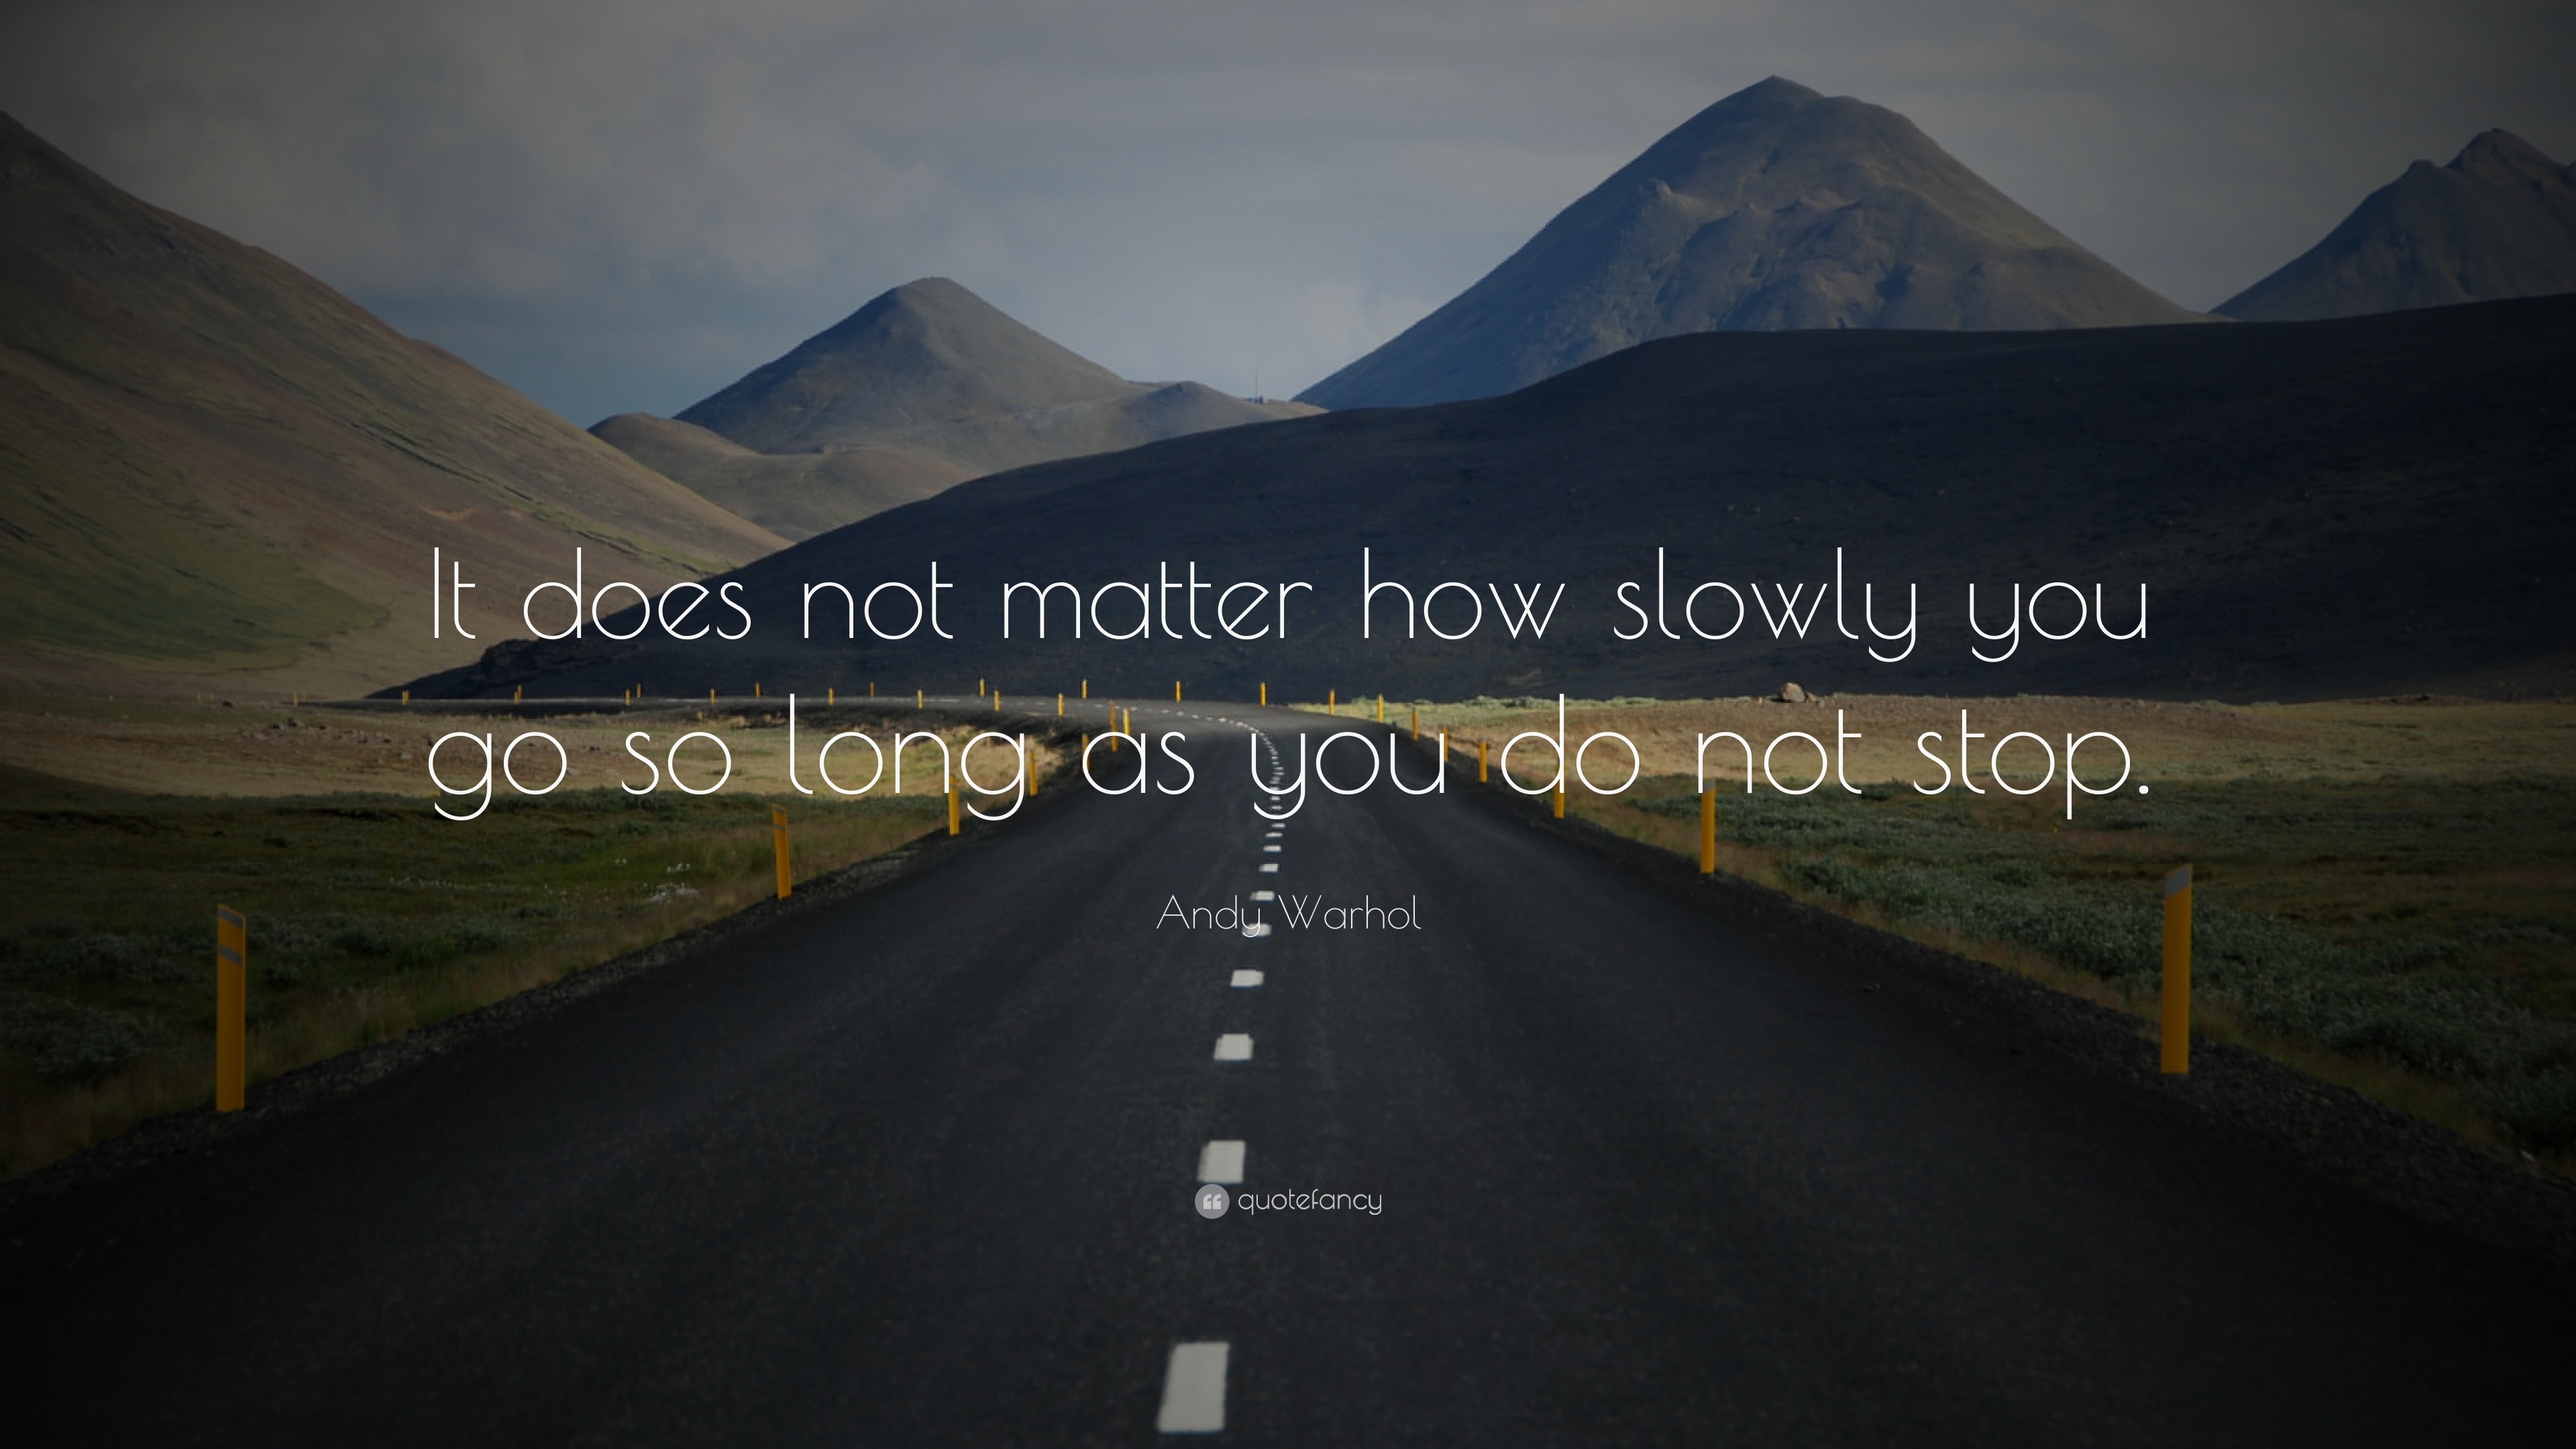 Andy Warhol Quote: "It does not matter how slowly you go ...